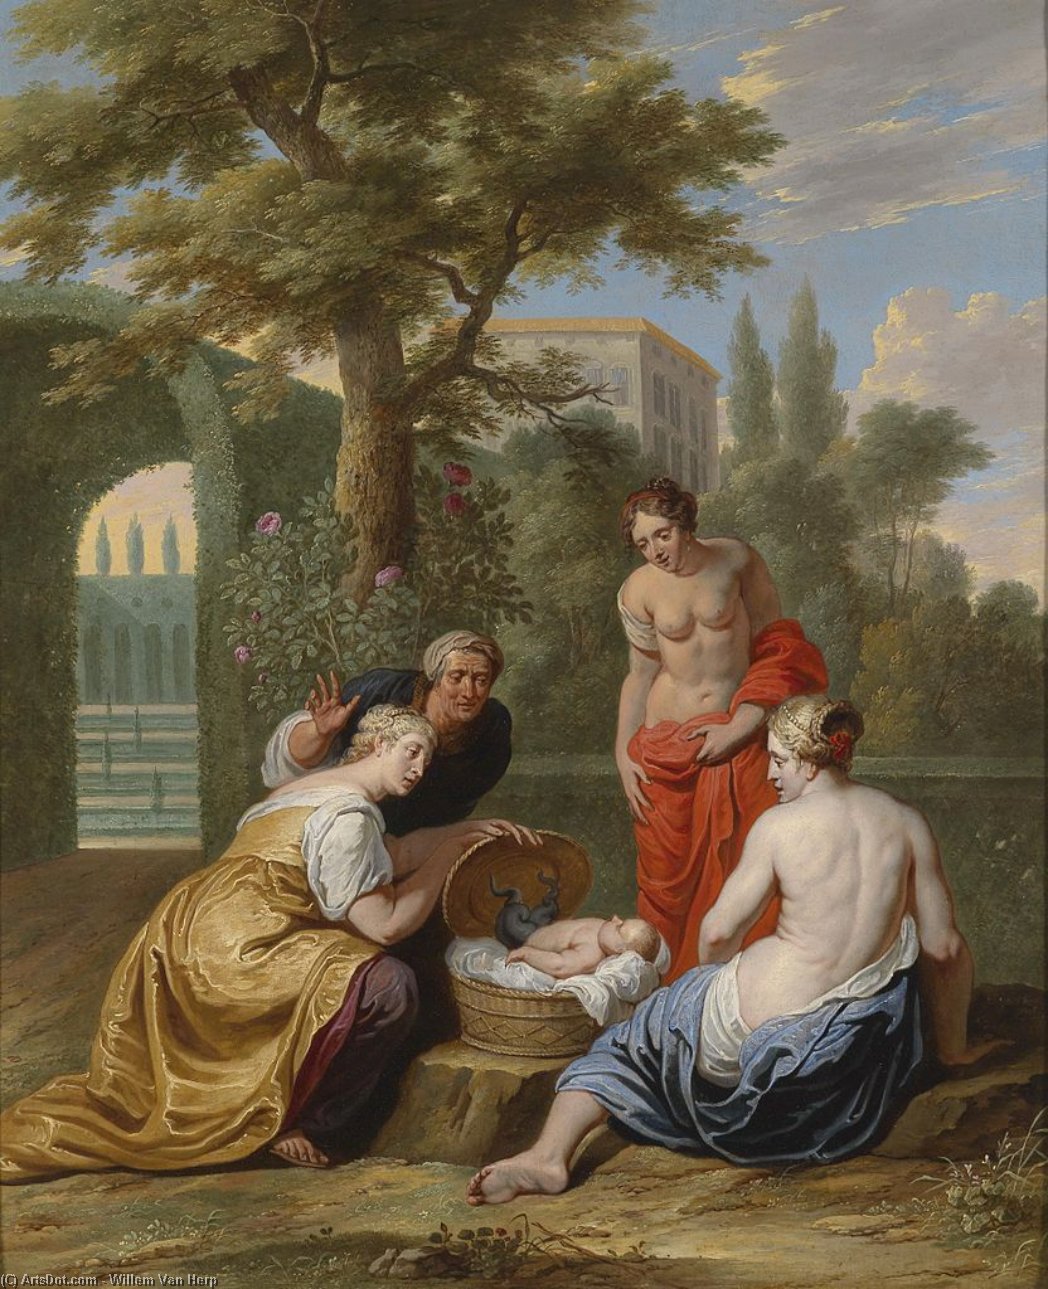 WikiOO.org - دایره المعارف هنرهای زیبا - نقاشی، آثار هنری Willem Van Herp - he finding of the infant Erichthonius by Cecrops's daughters.